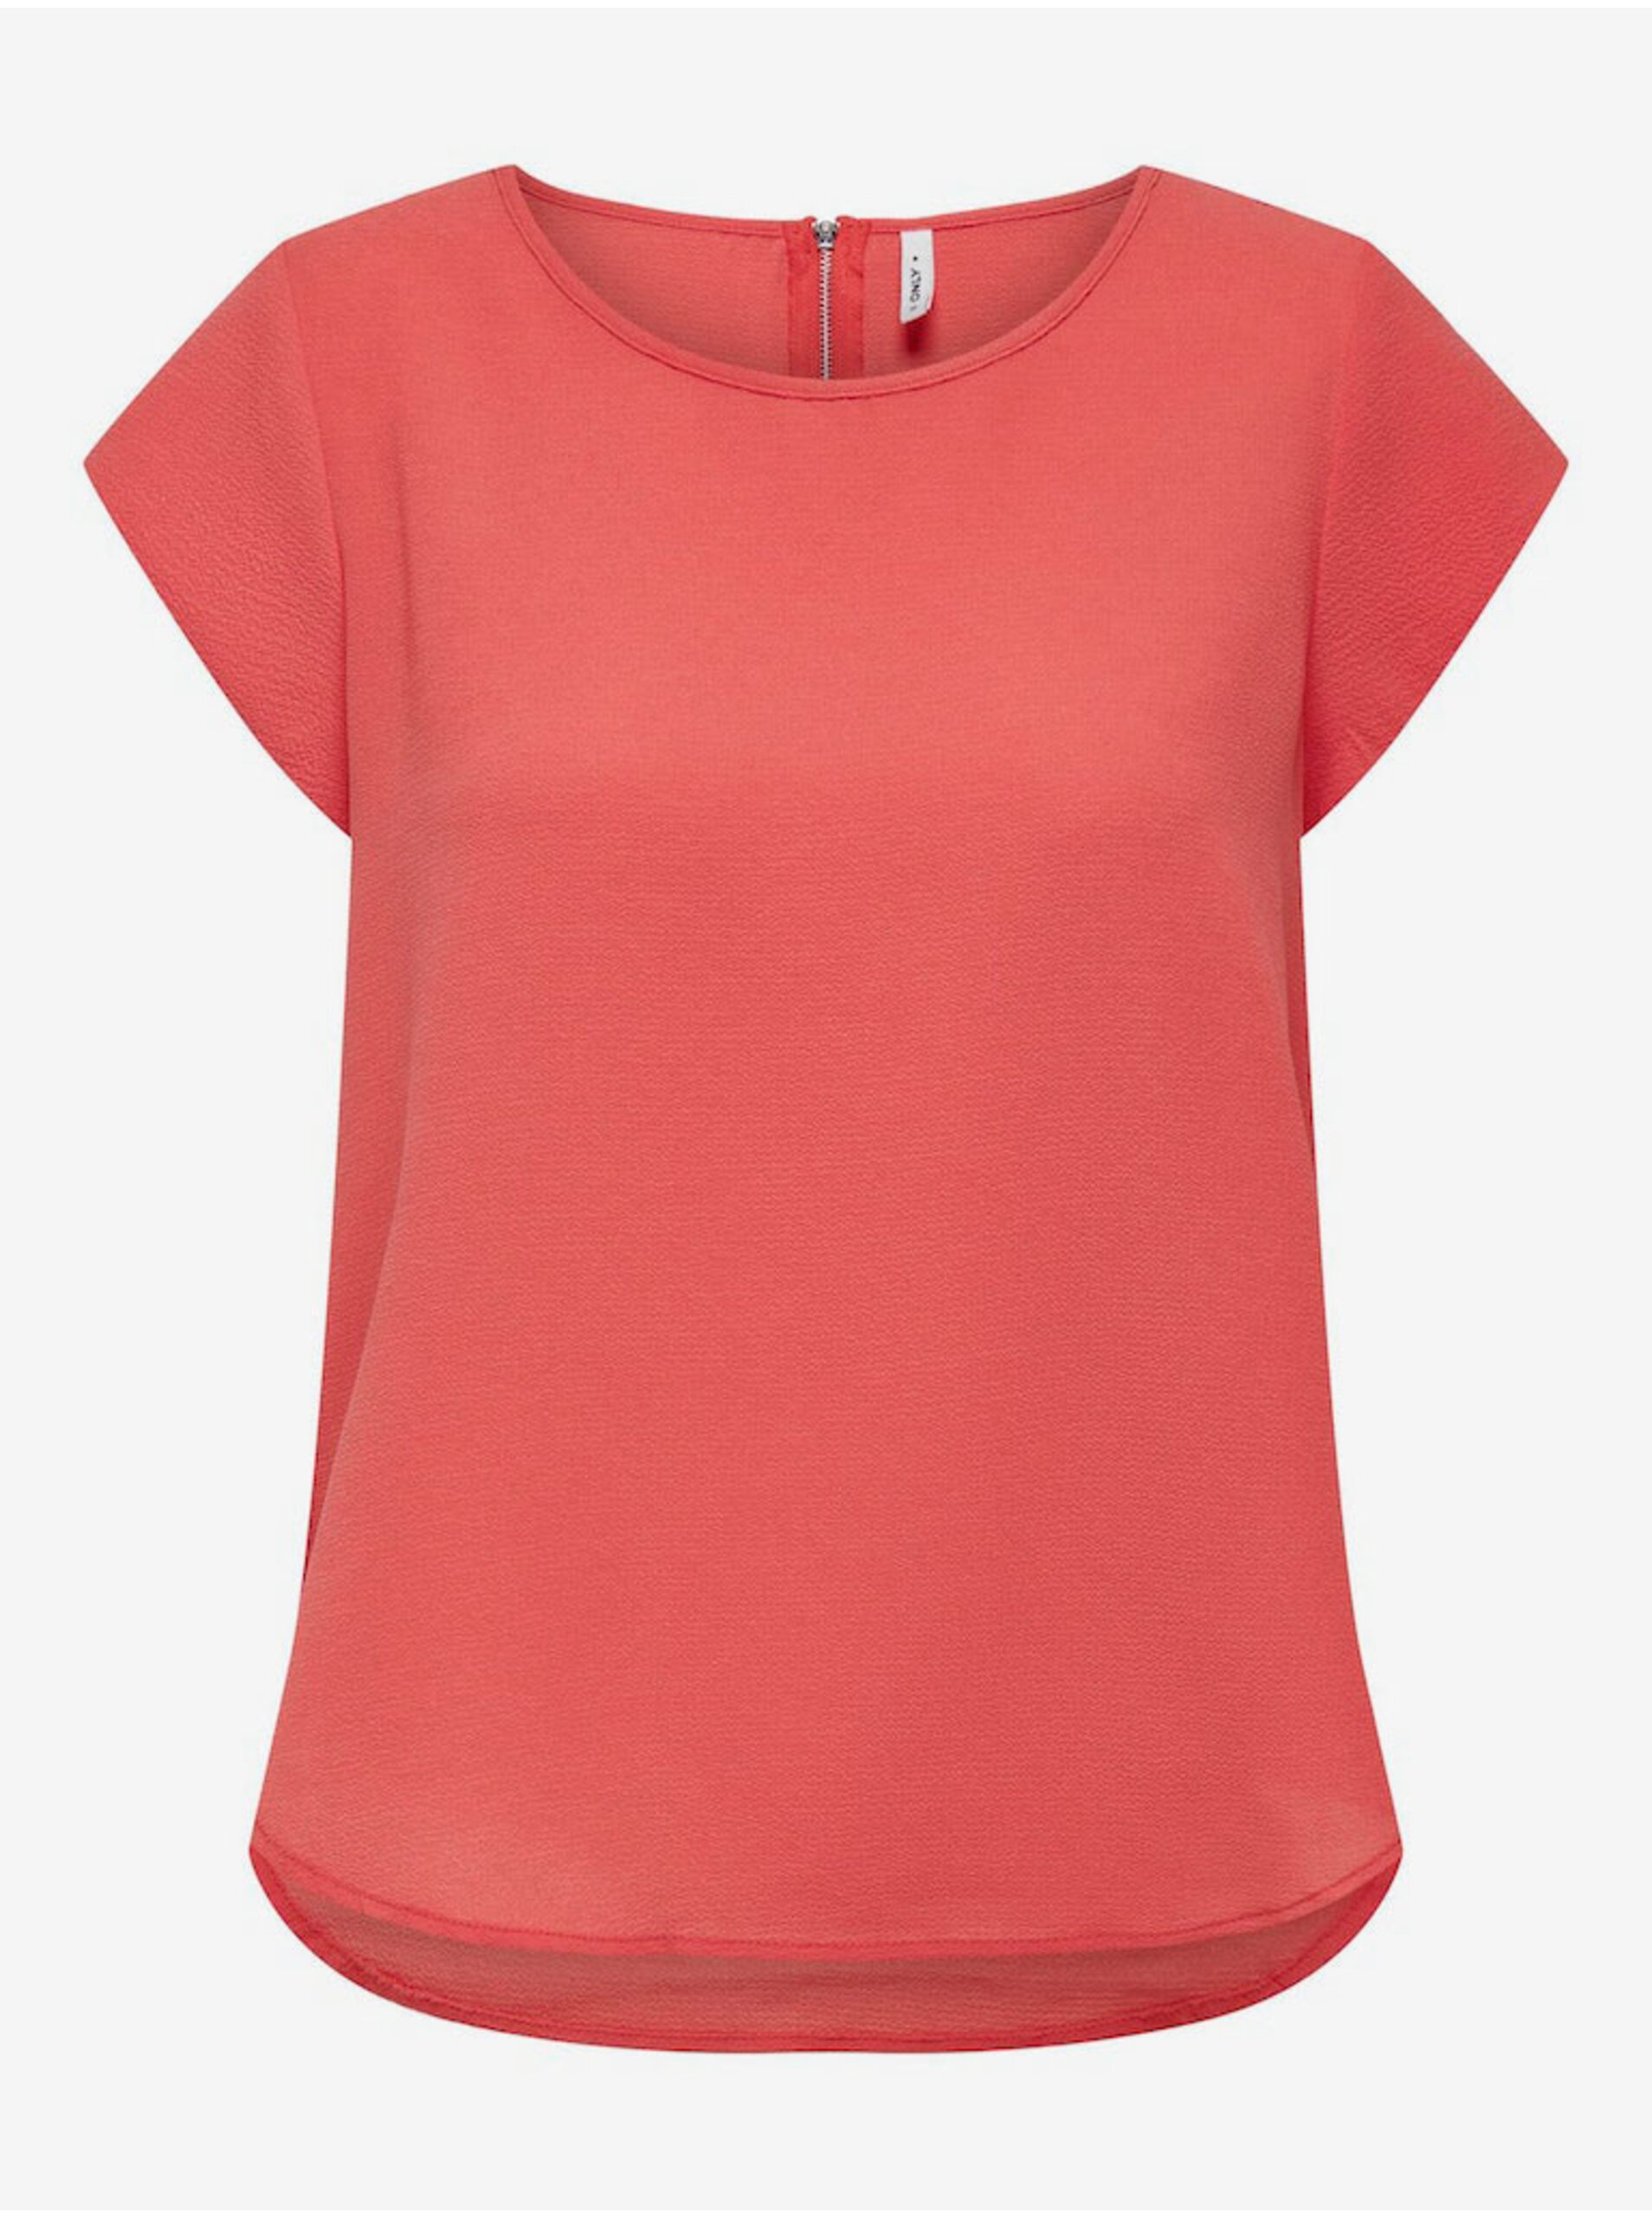 Women's coral blouse ONLY Vic - Women